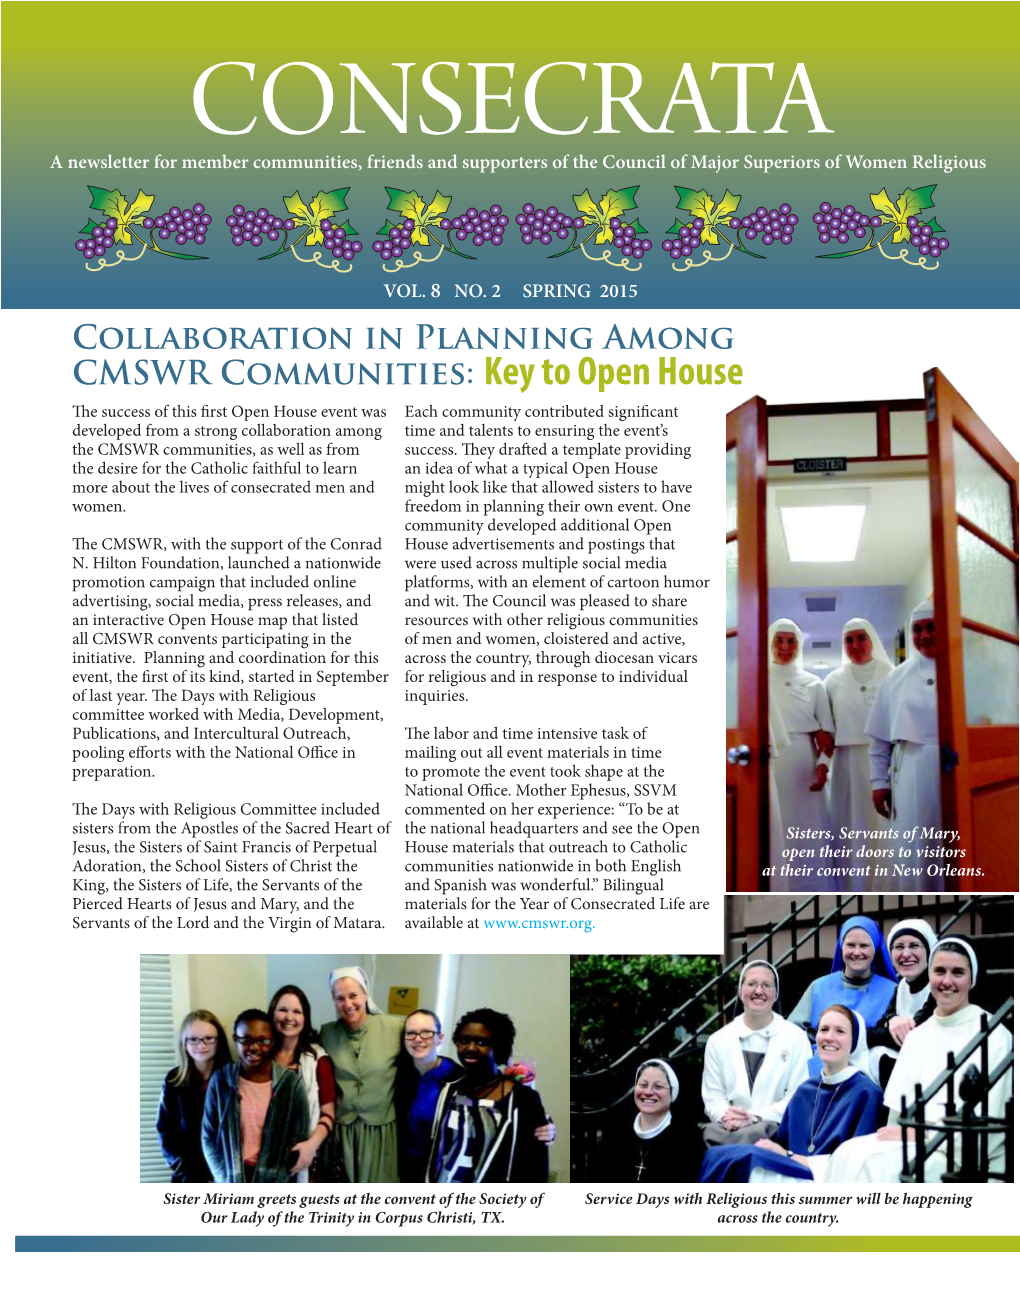 Collaboration in Planning Among CMSWR Communities